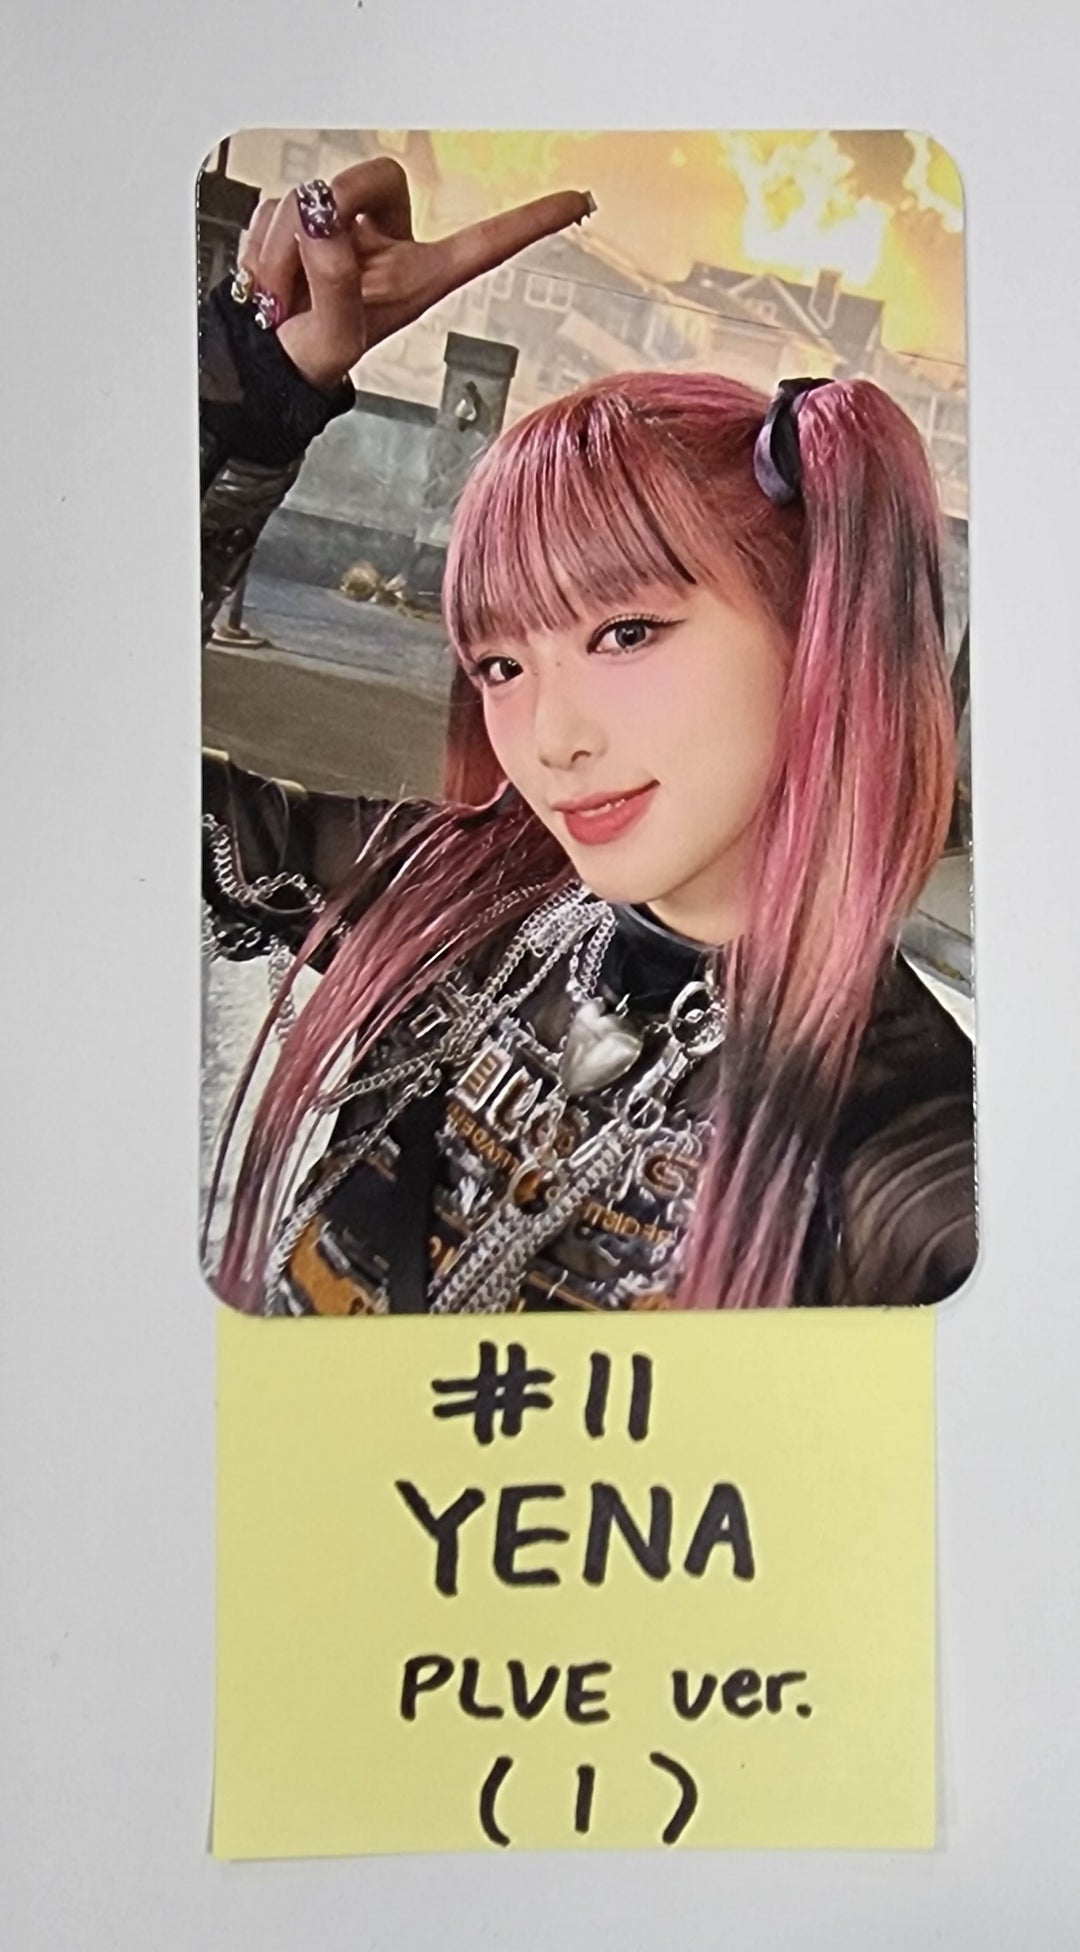 YENA "Good Morning" - Official Photocards [PLVE ver.] [24.1.16]